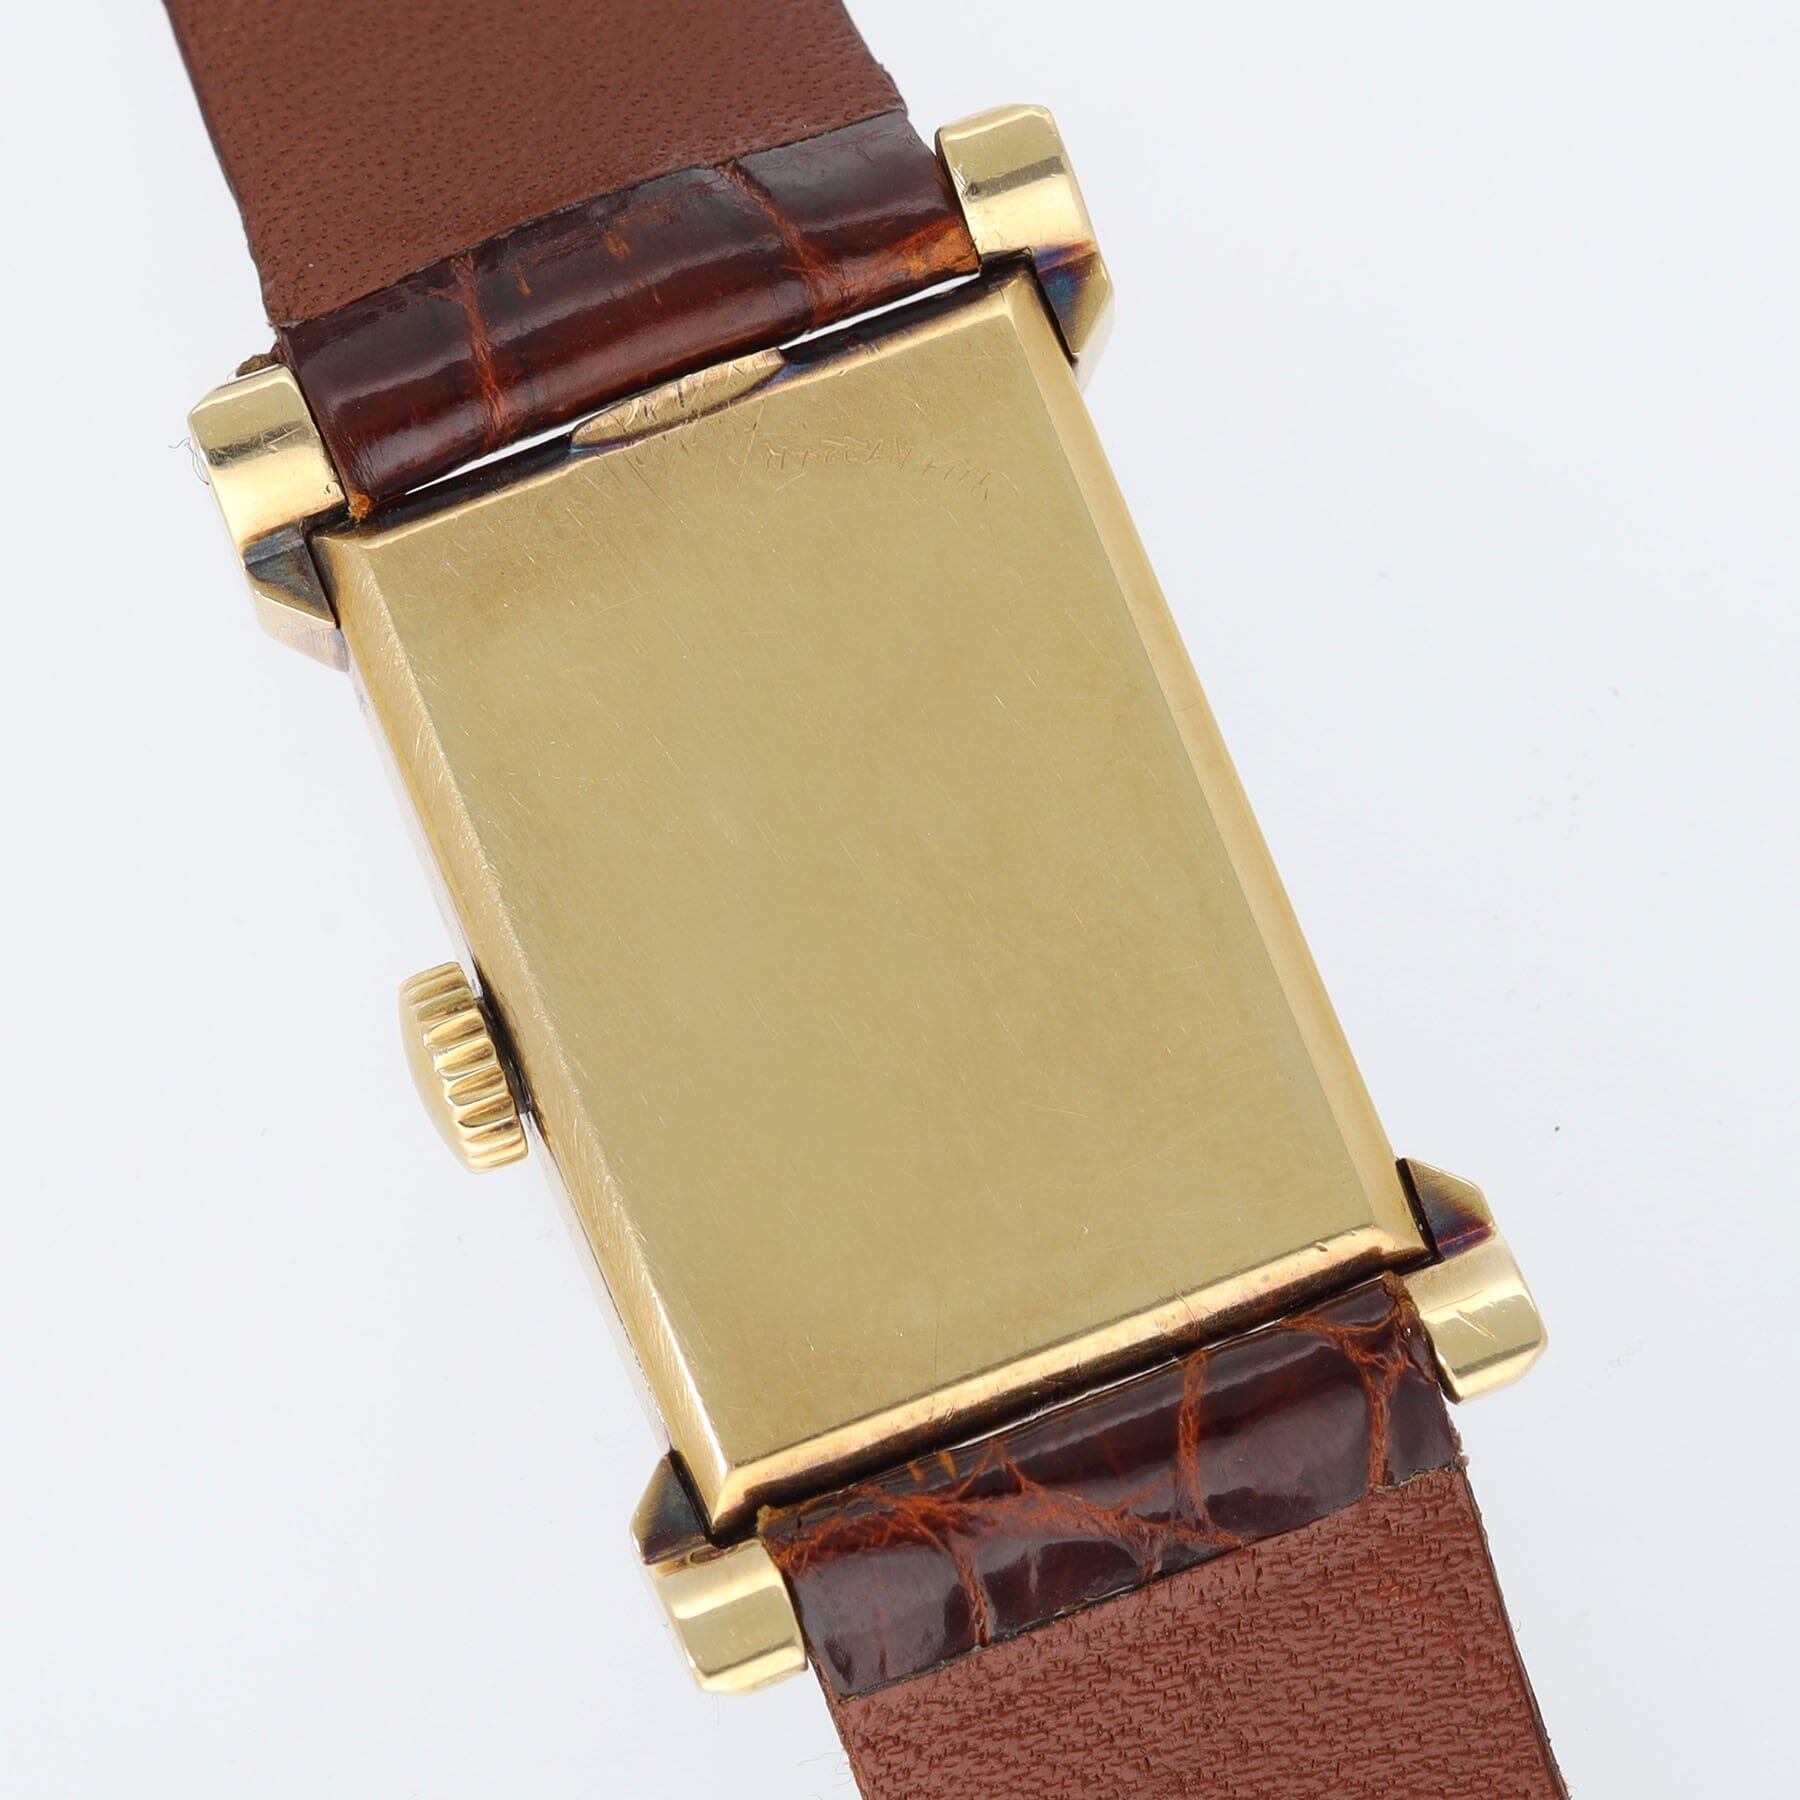 Patek Philippe 18 k gold Rectangular Dresswatch "Bunny Lugs" with Extract From The Archives ref 2403